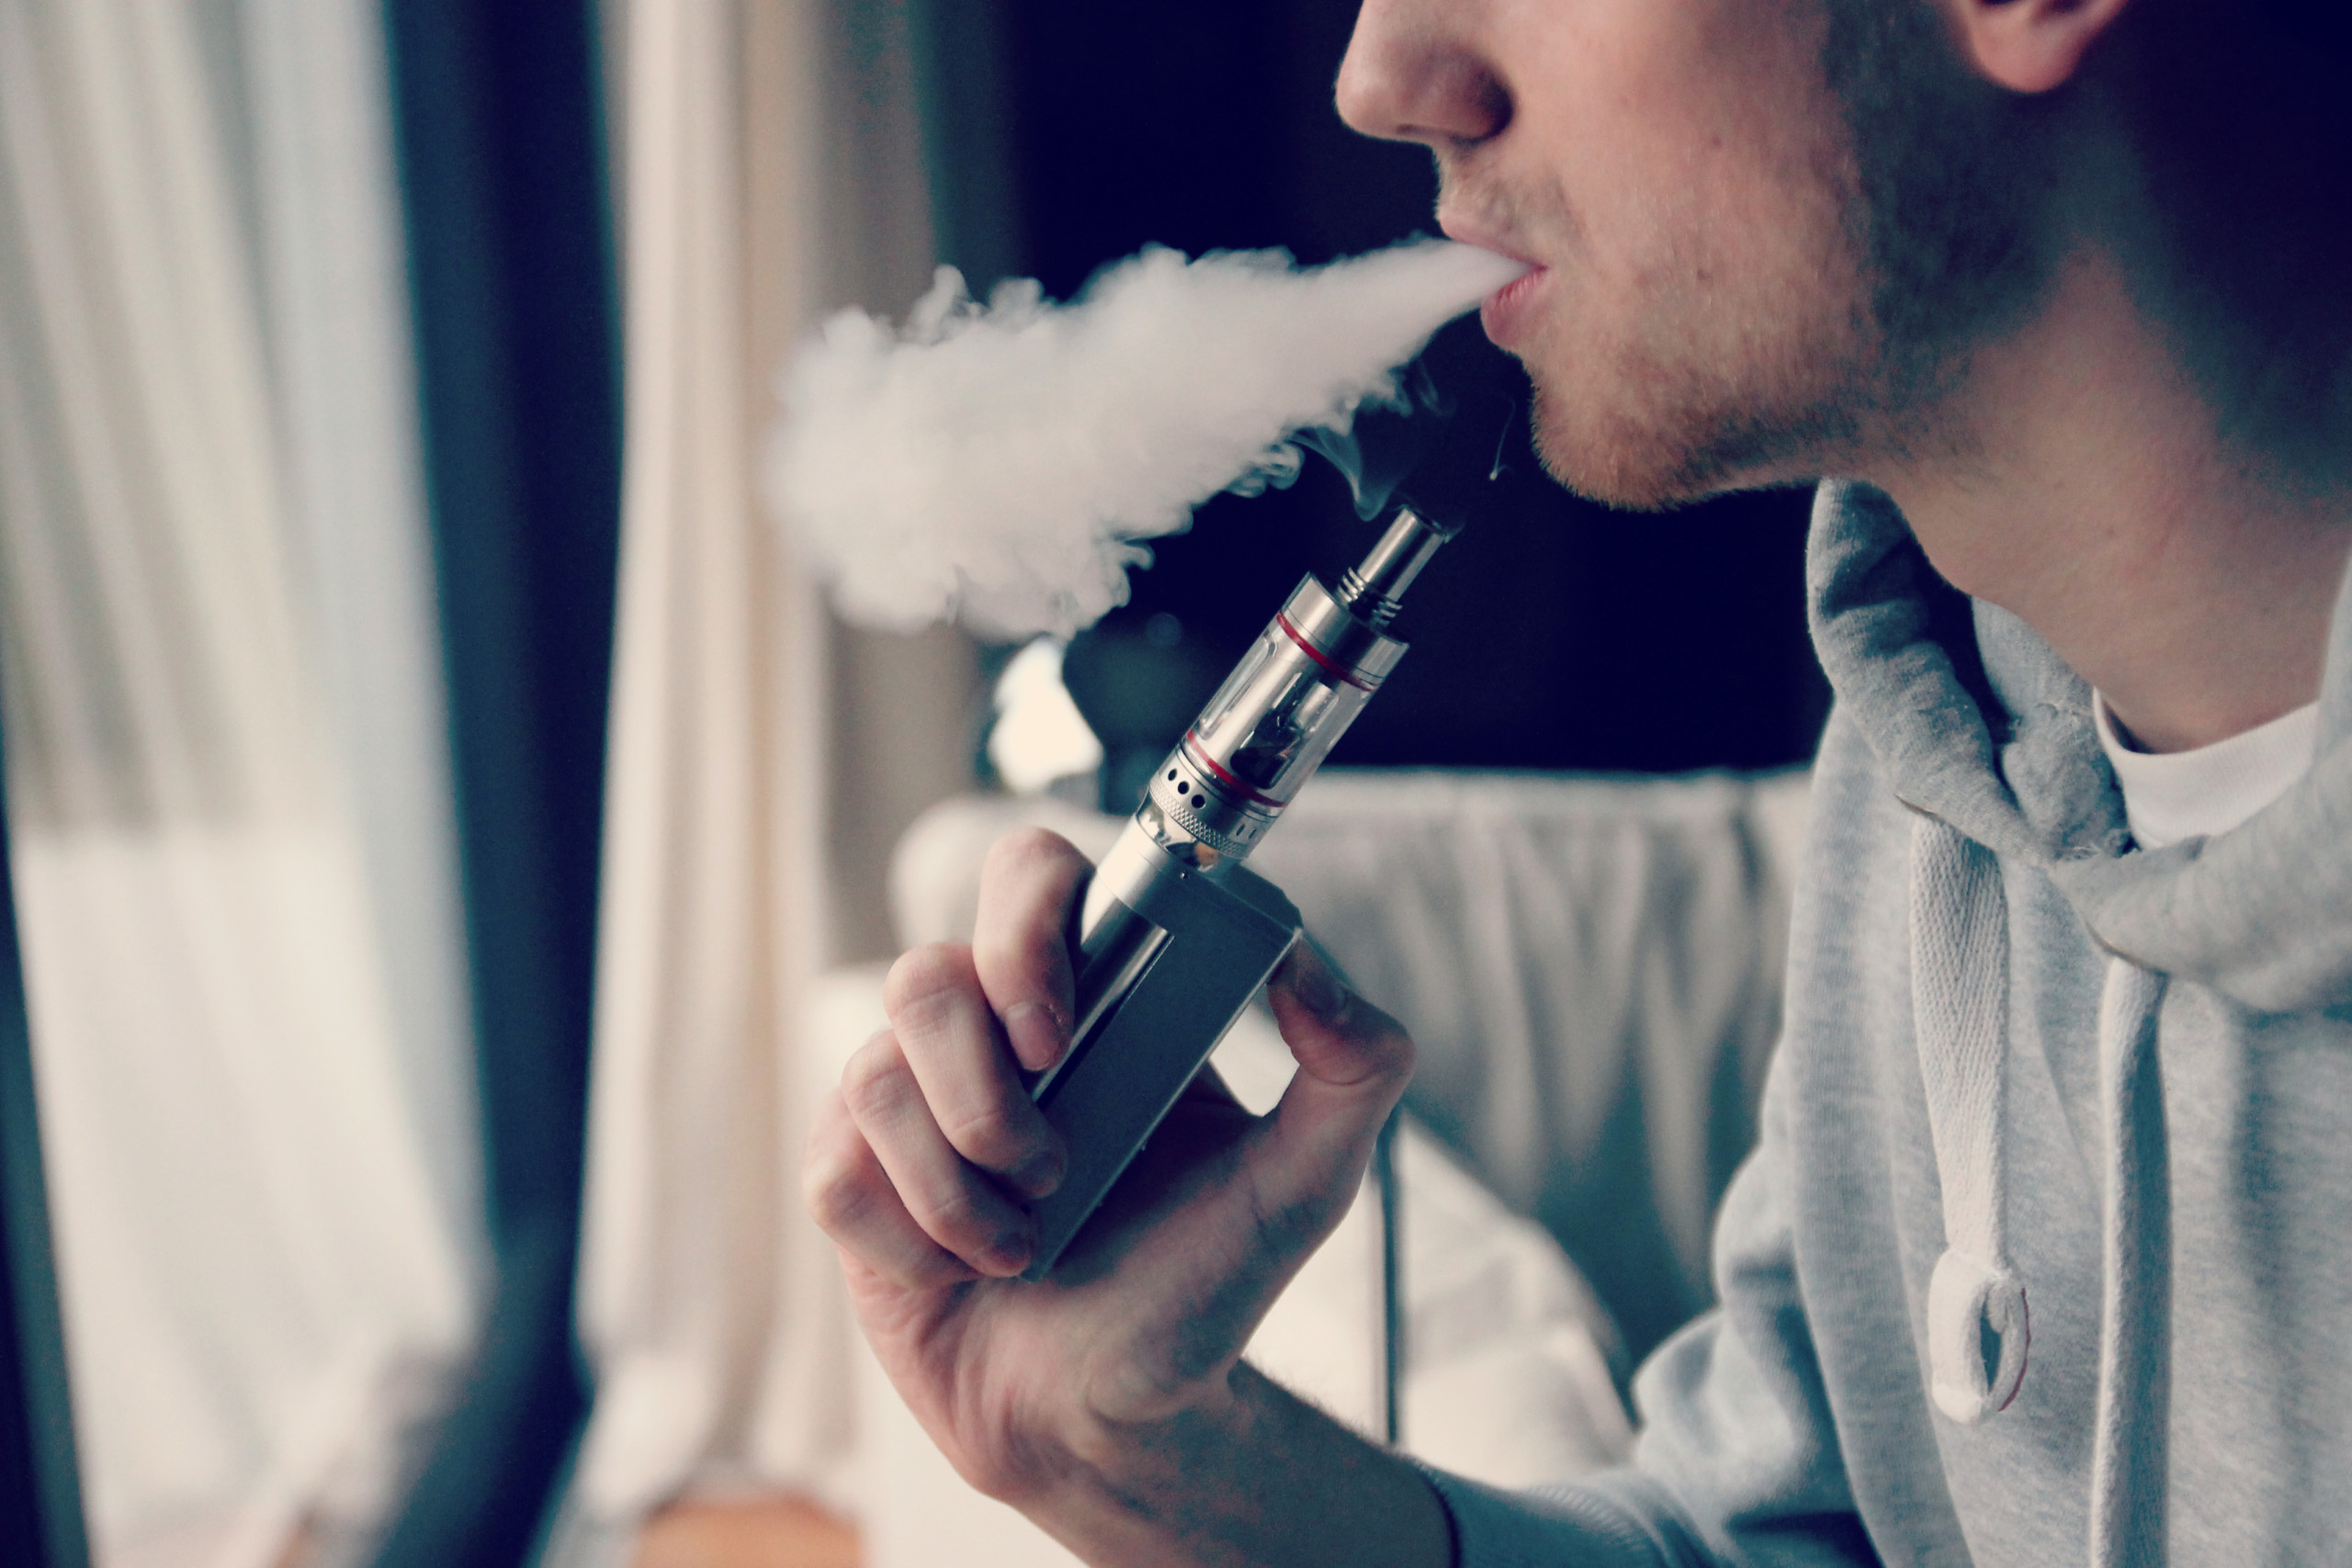 Choosing The Right Juice For Your Vaping Session